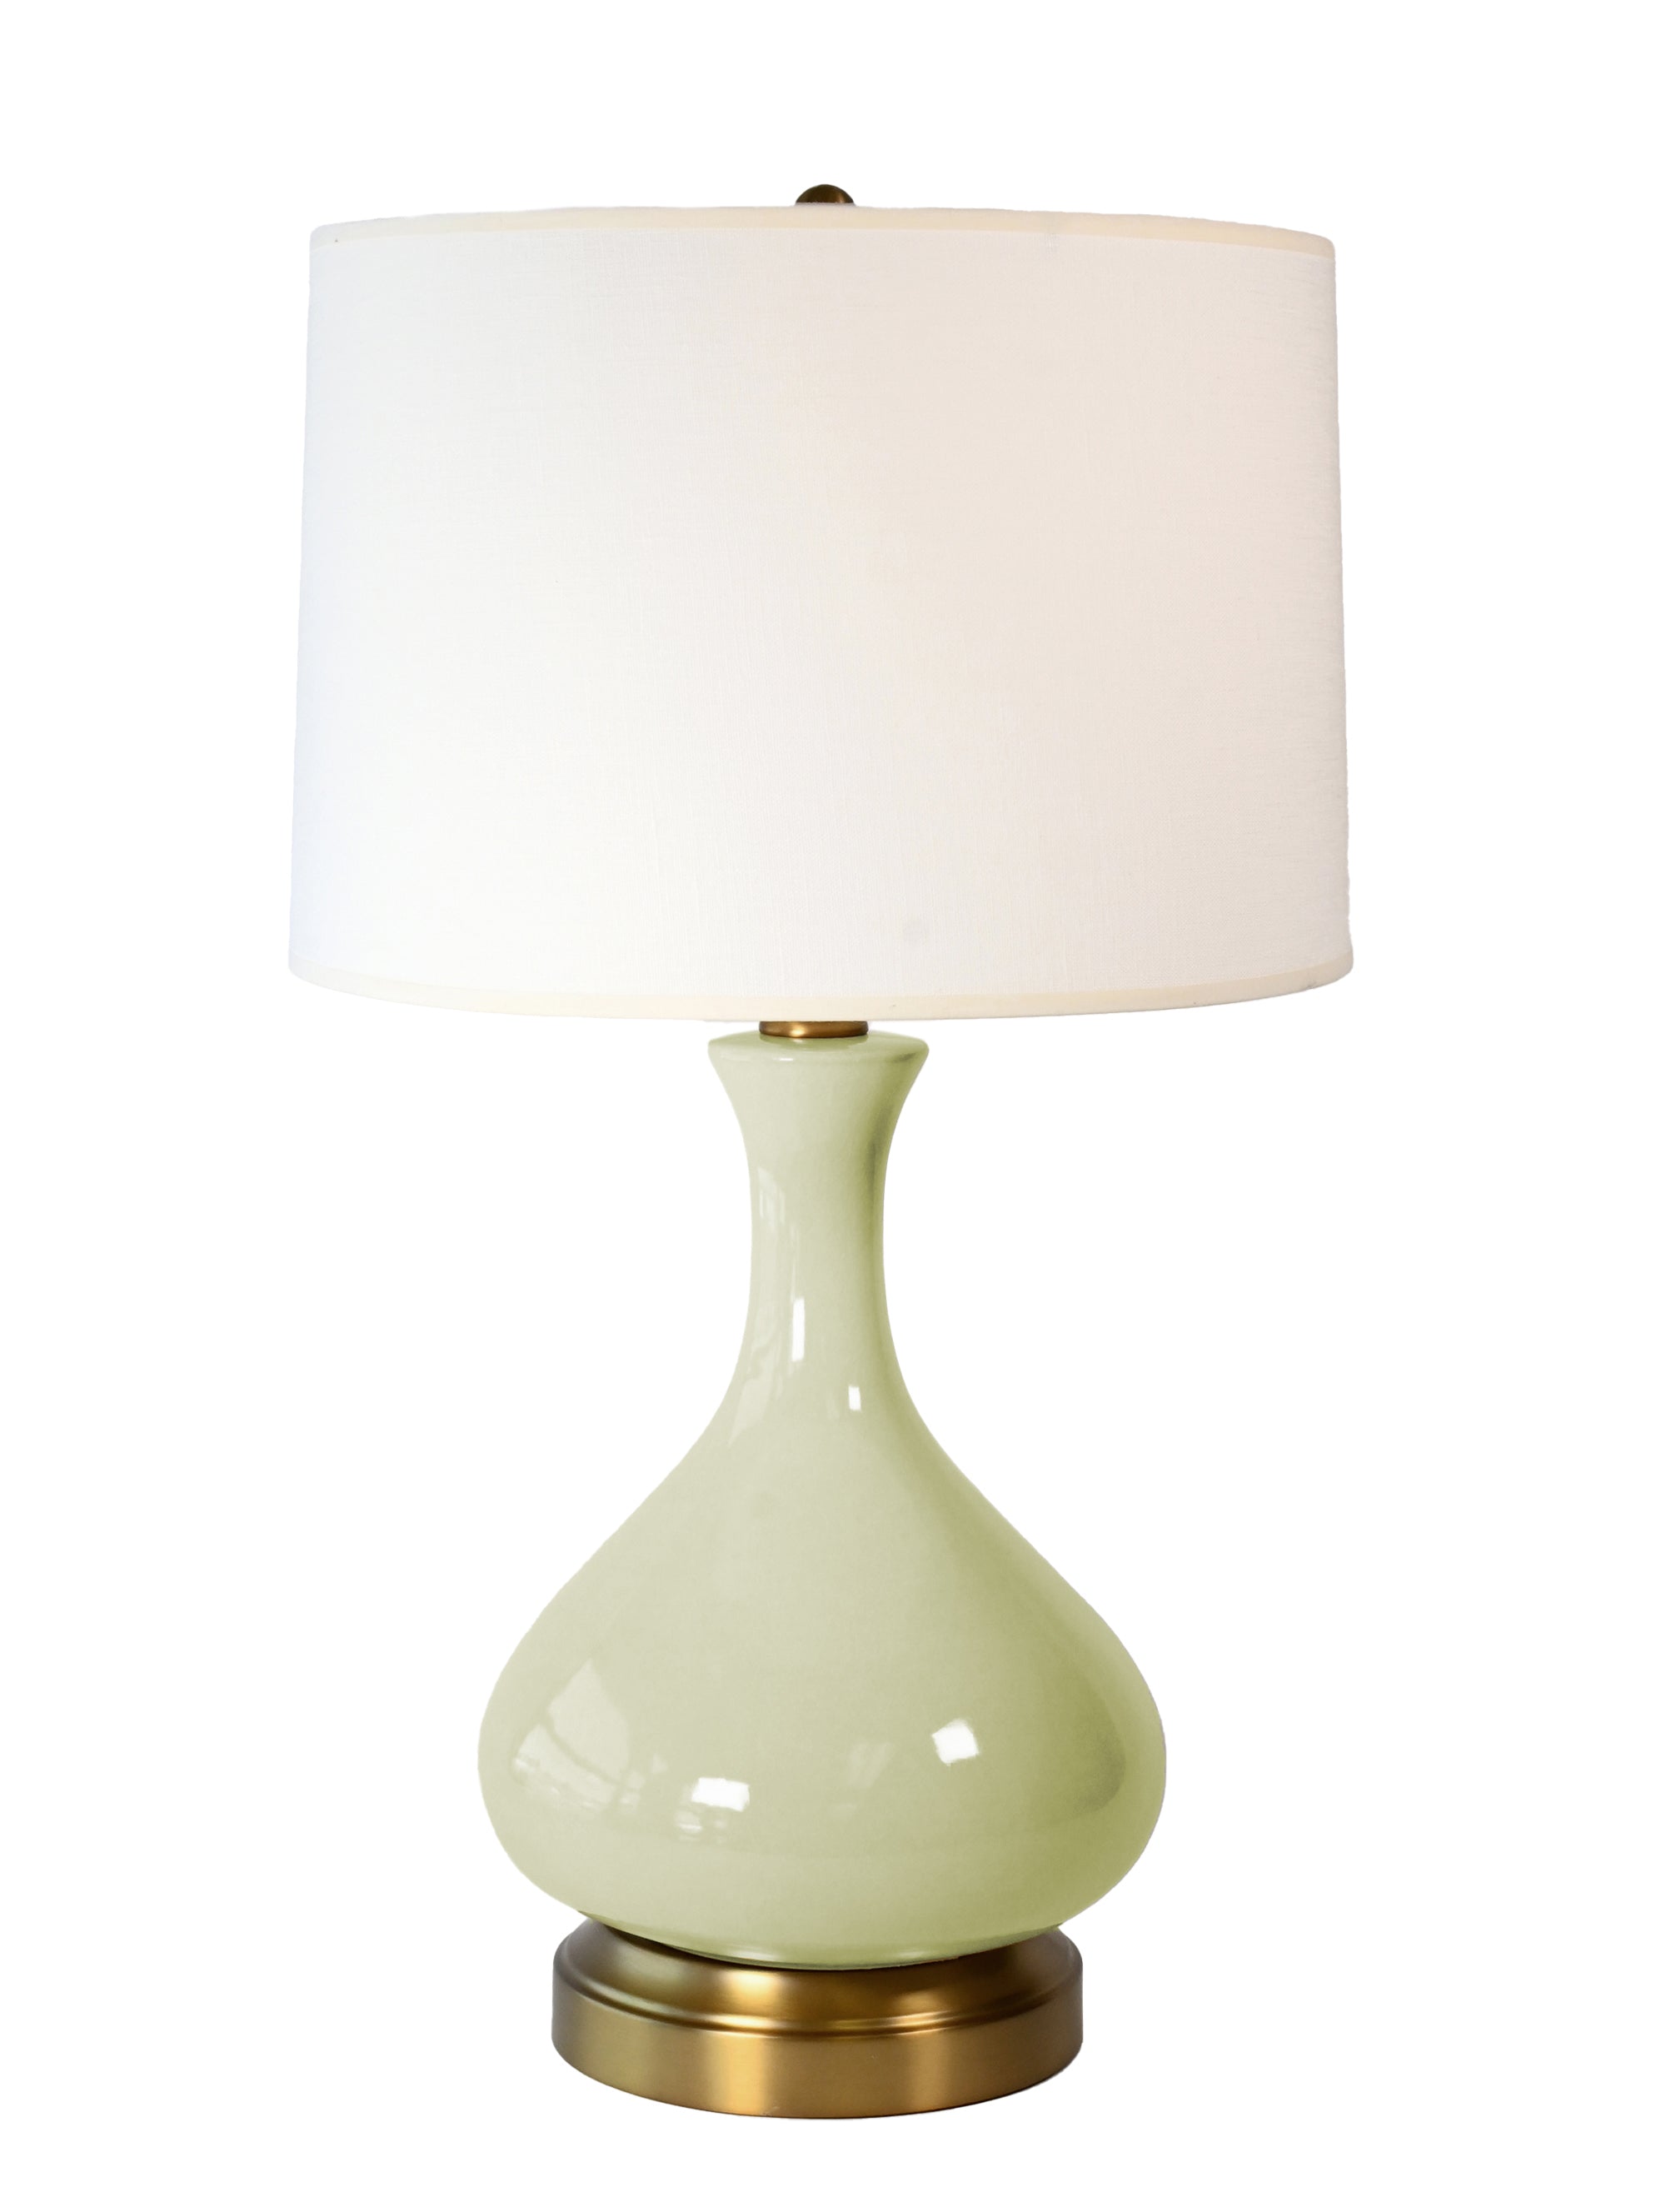 Bartlett Sage Green on Brass Cordless Lamp - Made in the USA